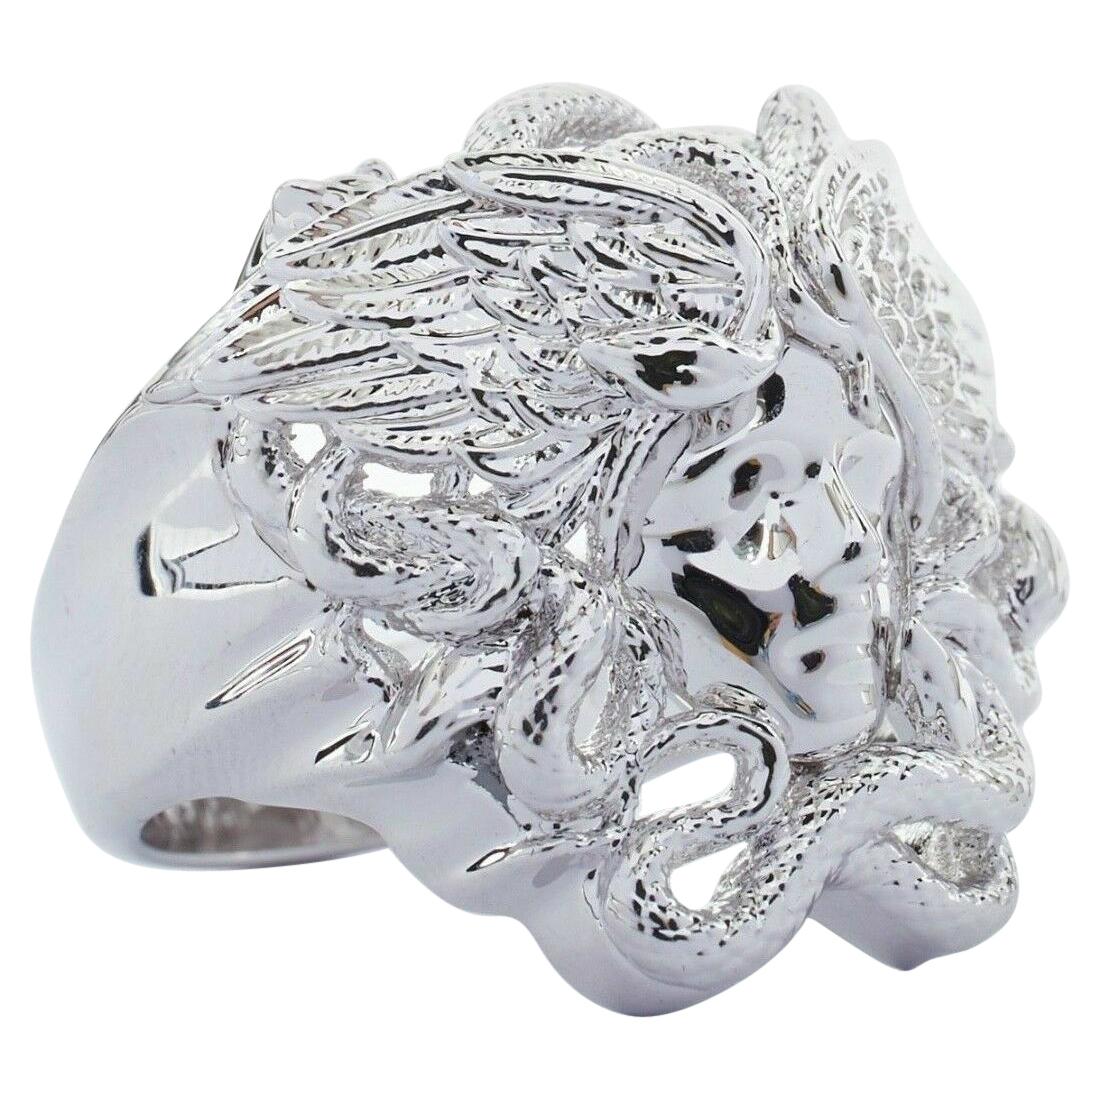 new VERSACE Palazzo Medusa snake head silver large statement cocktail ring 10.75